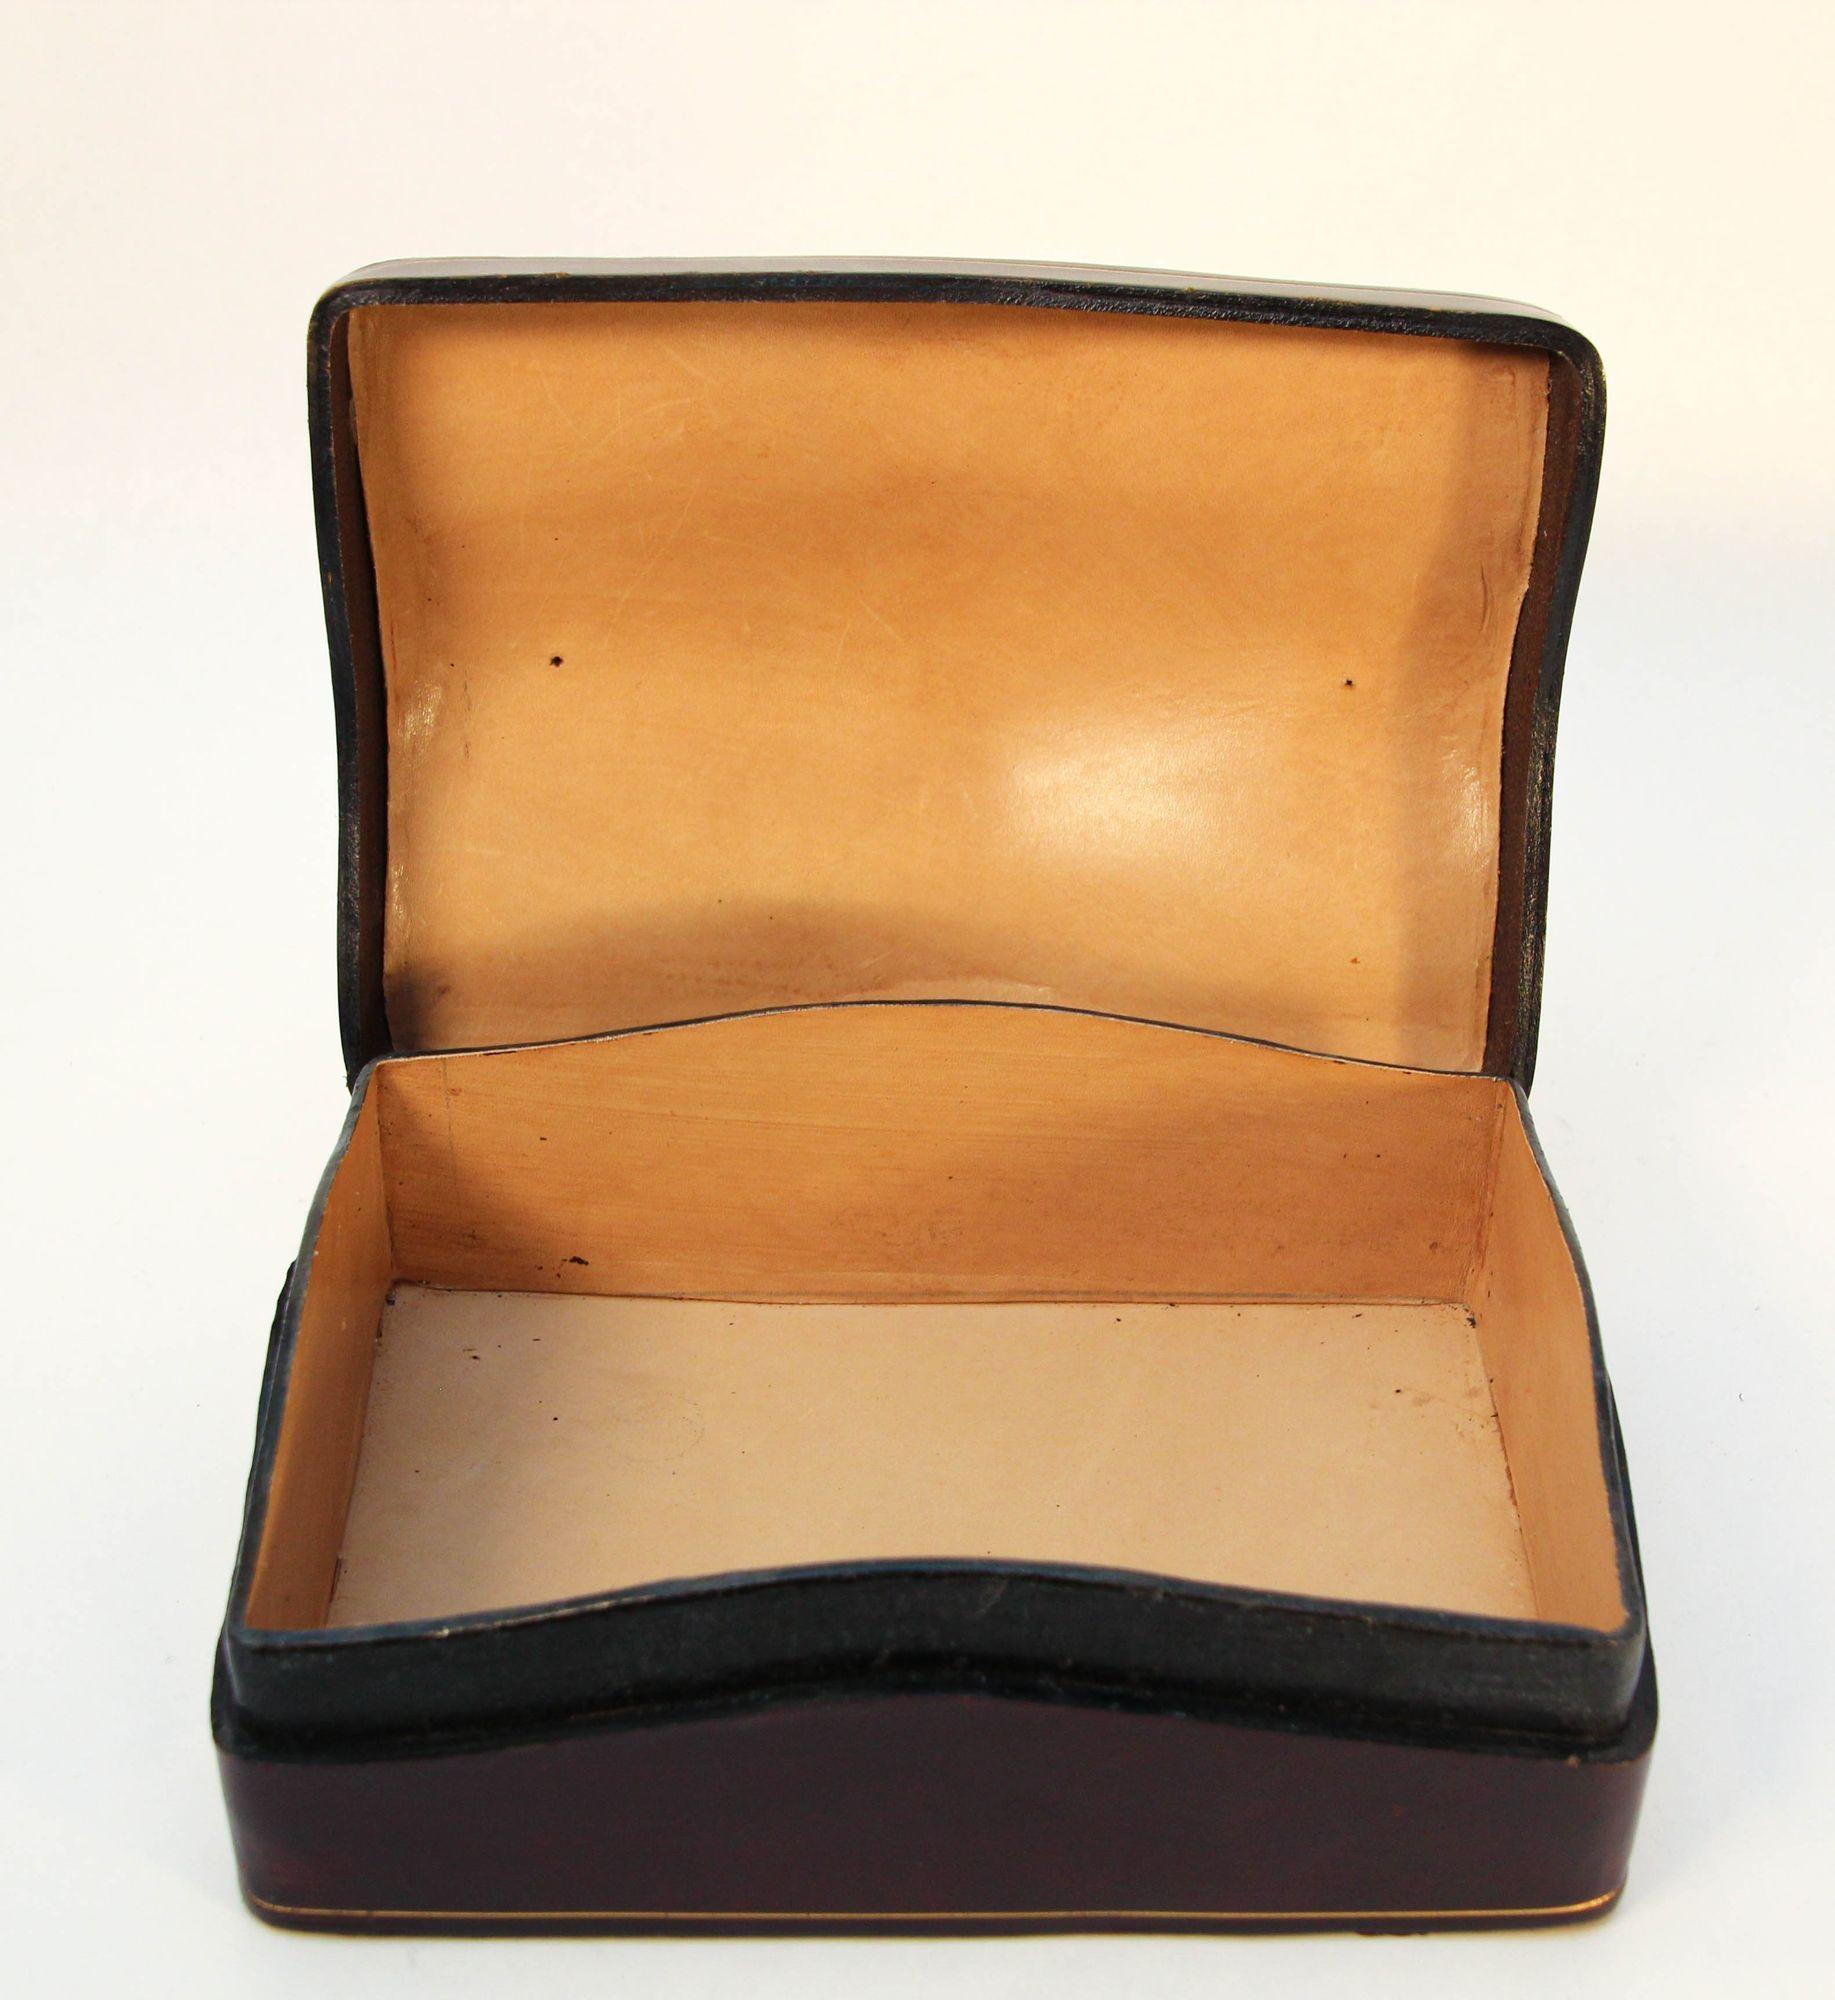 Neoclassical 1960s Venetian Brown Leather Humpback Box with Gold Embossed Trim Made in Italy